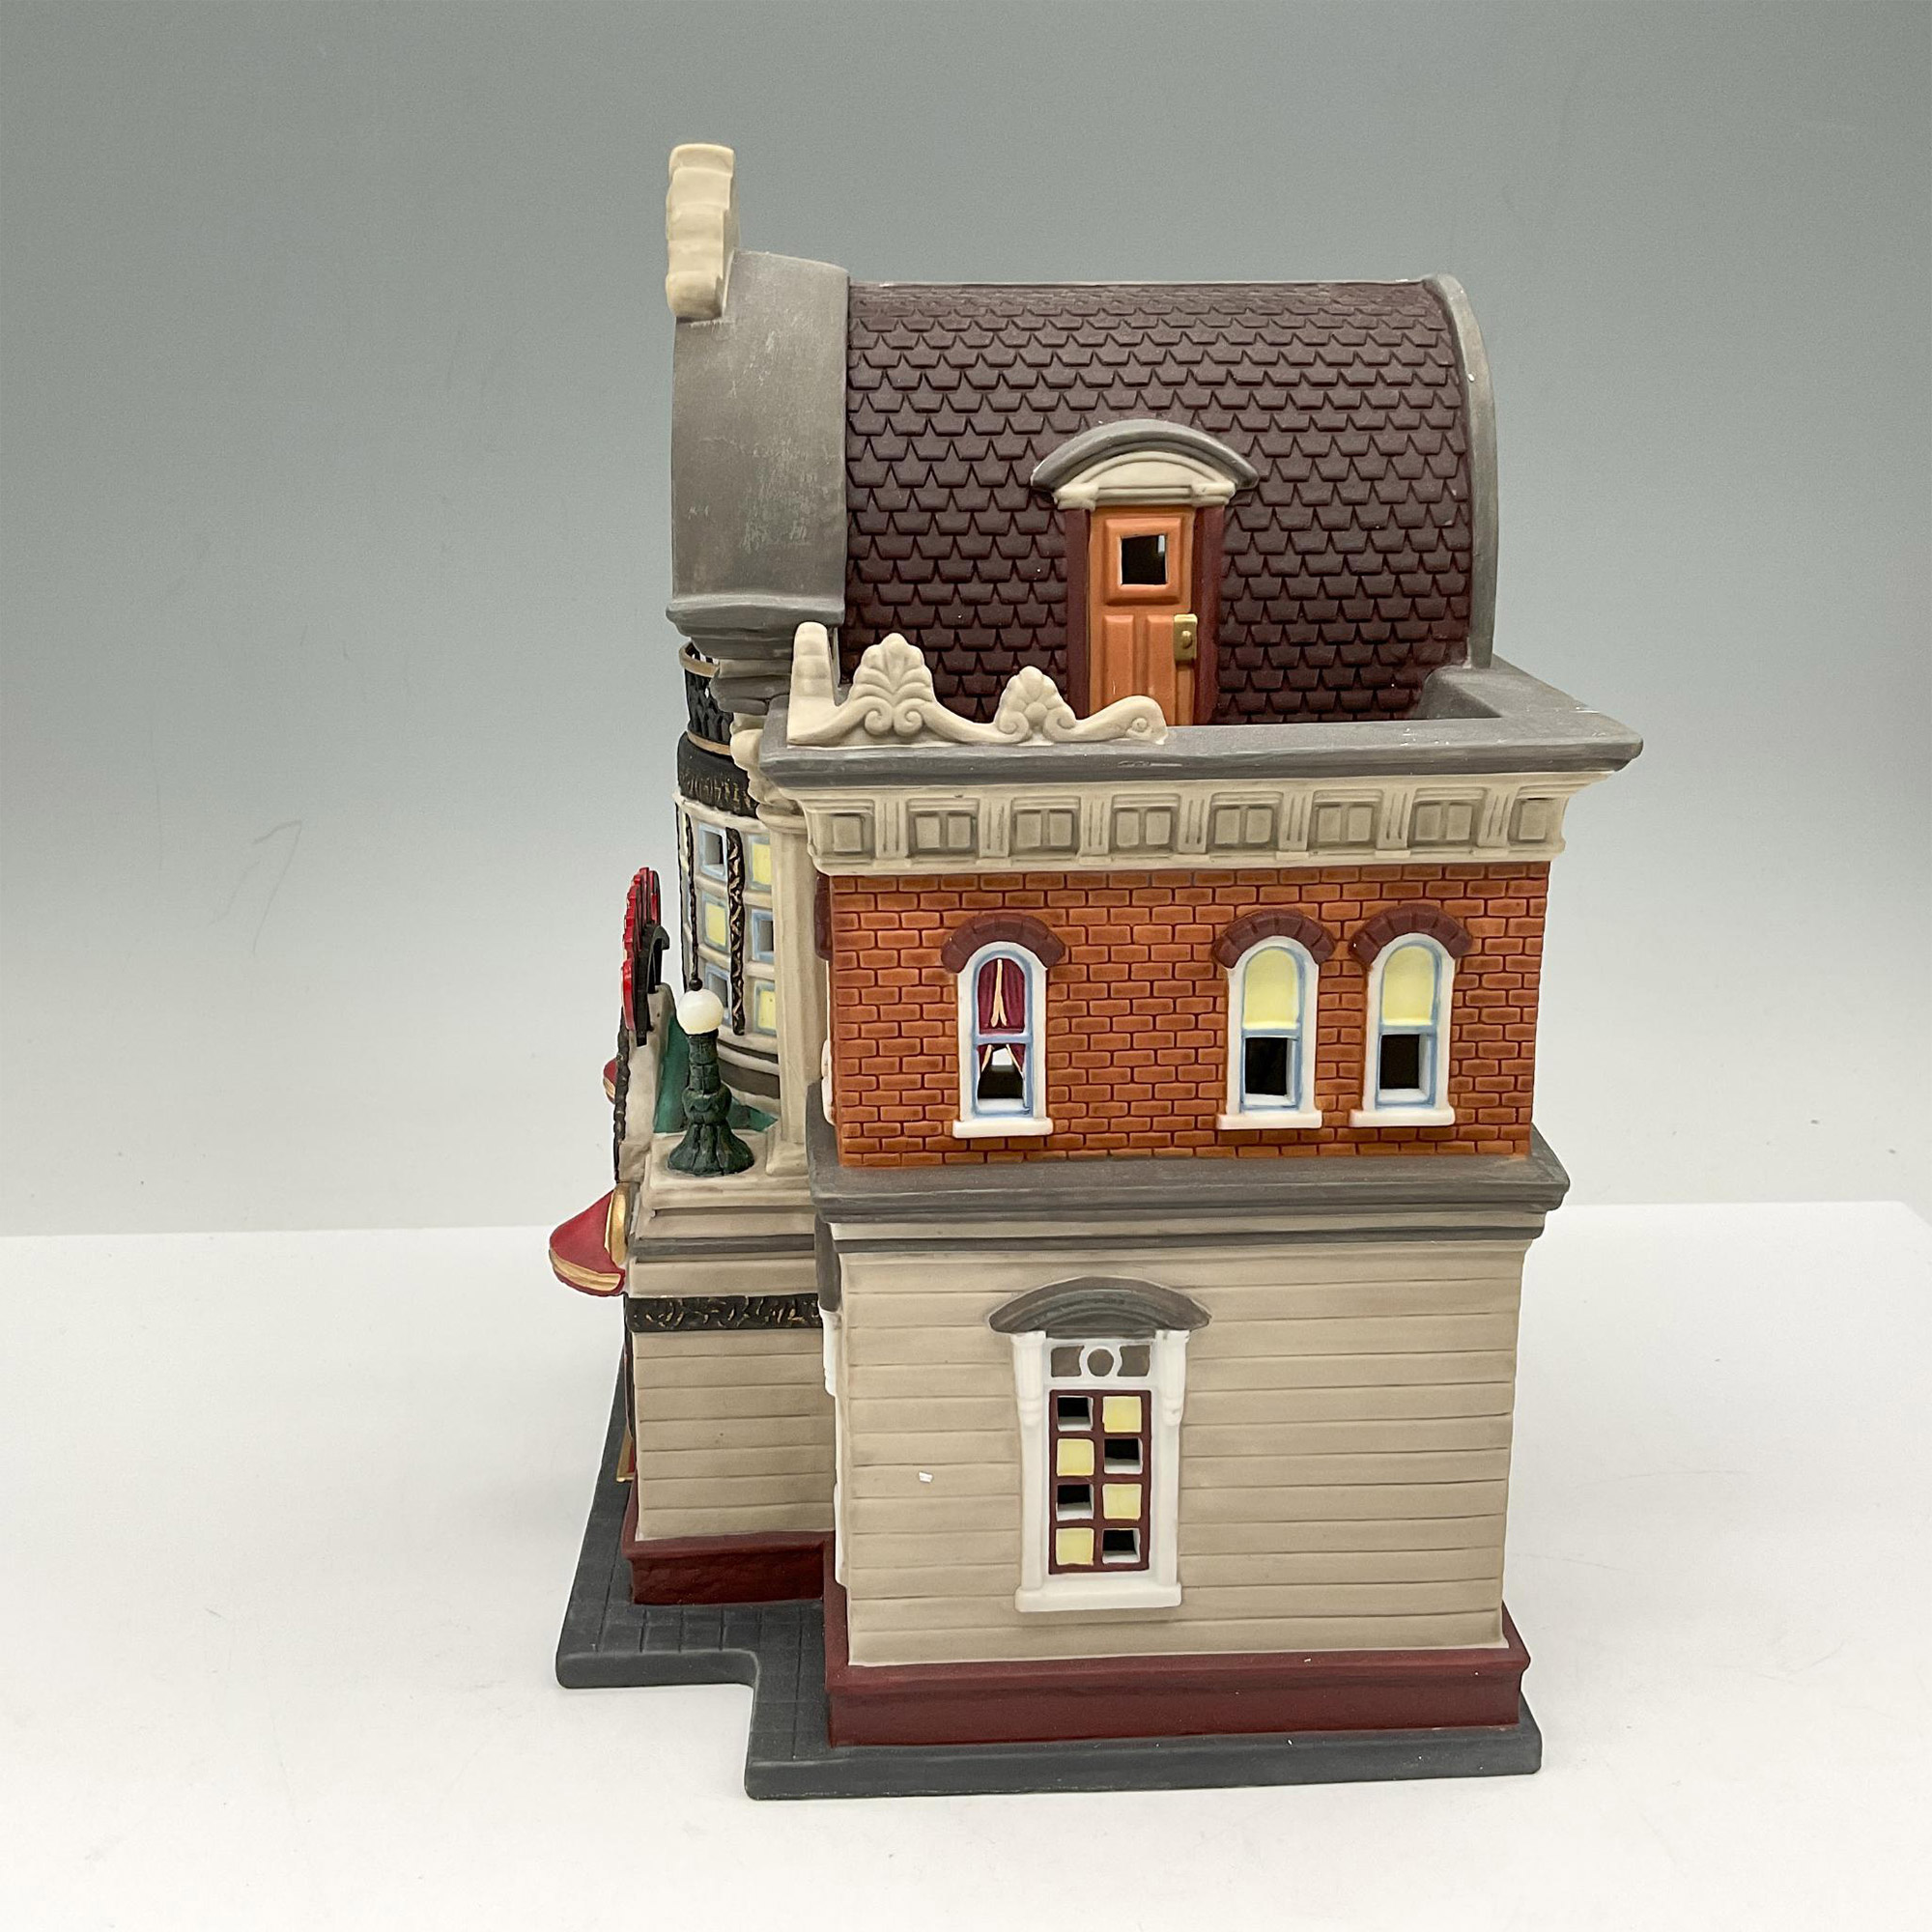 Department 56 Porcelain The Monte Carlo Casino - Image 4 of 6